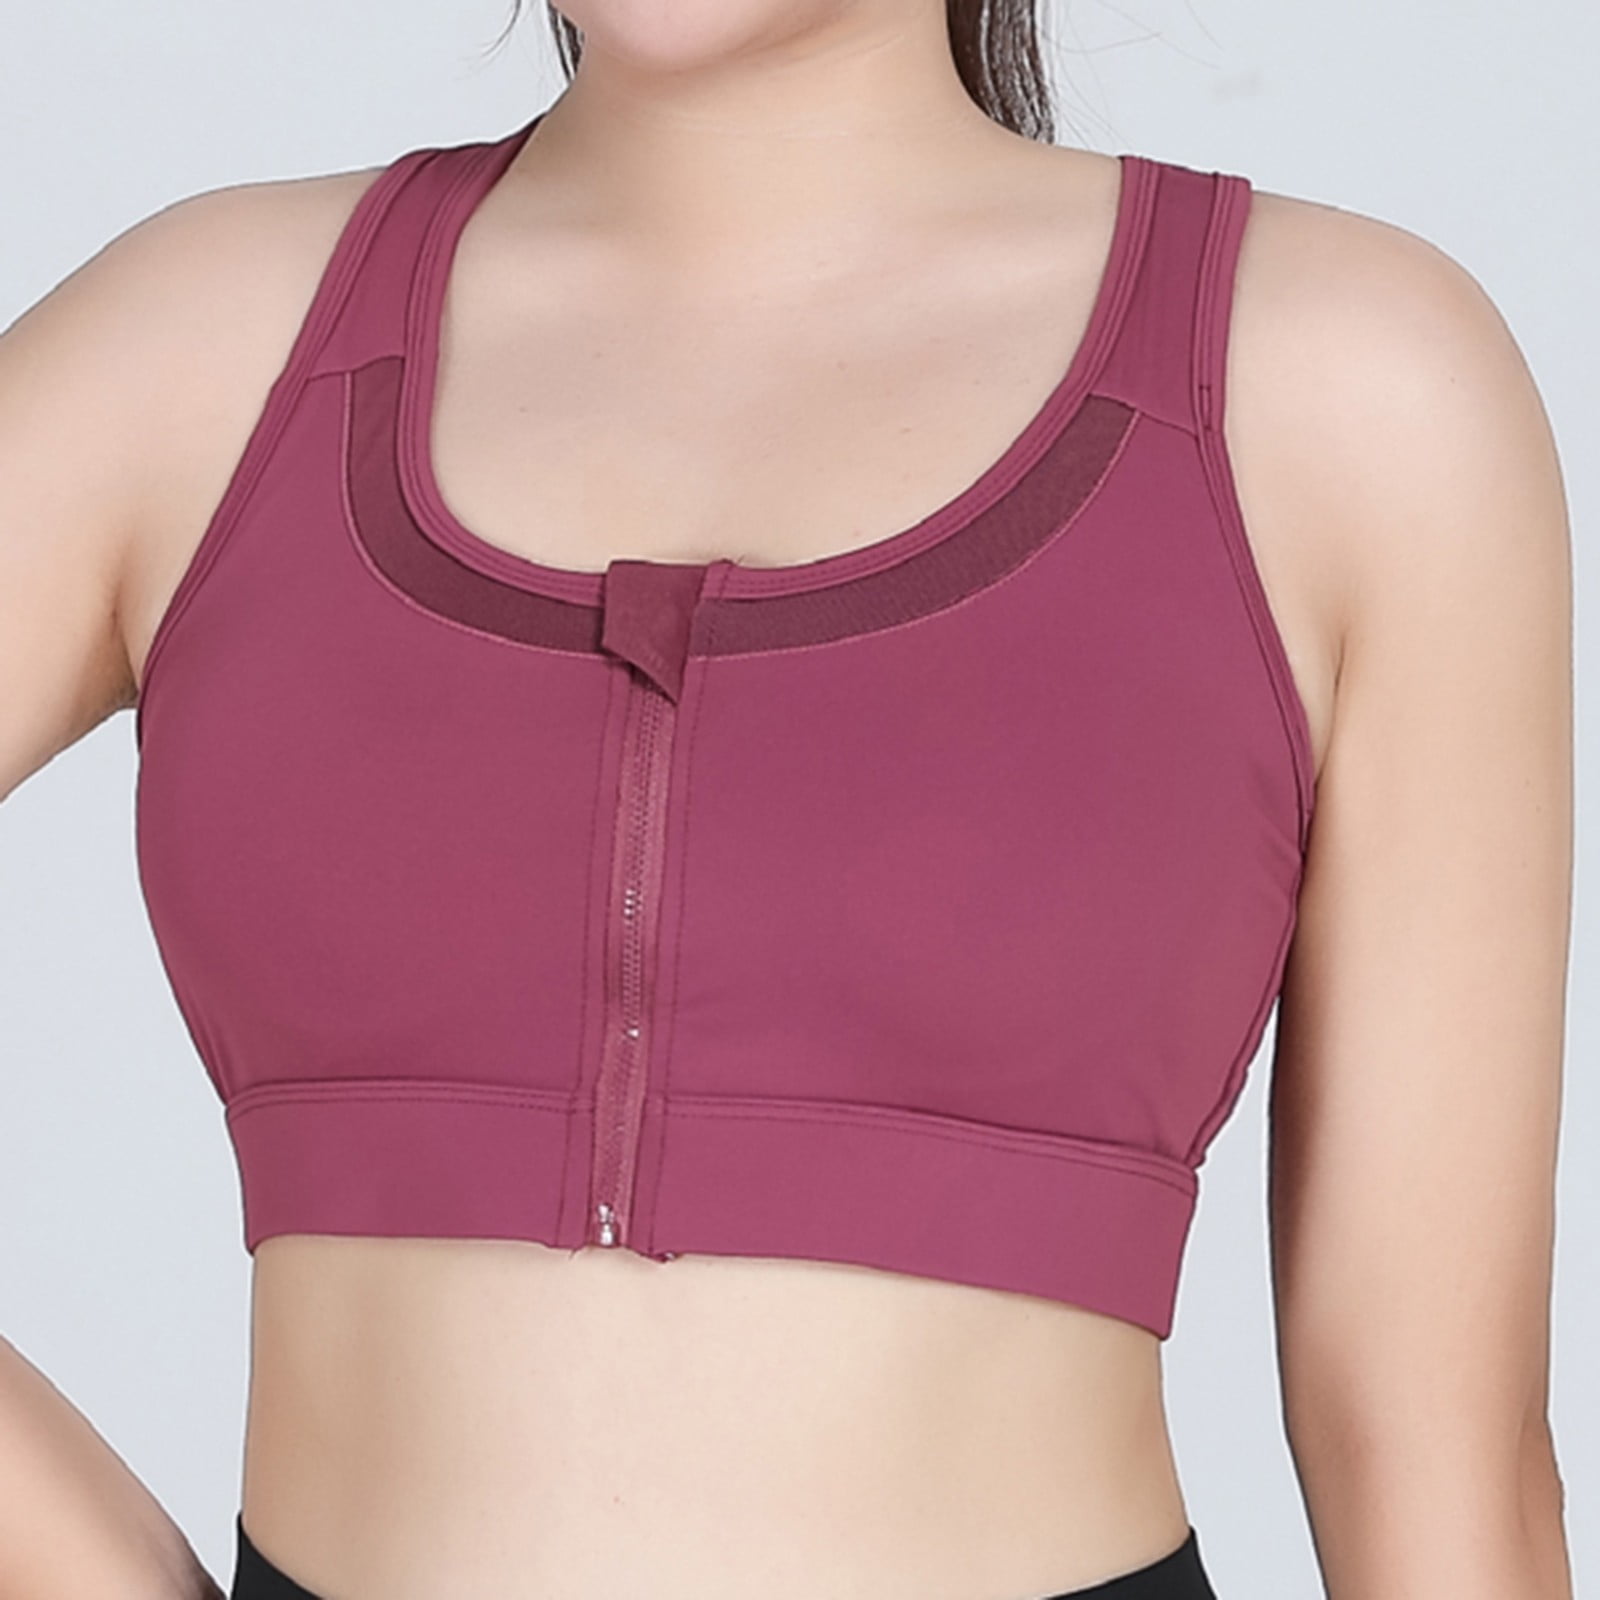 Aueoeo Sports Bras for Women High Support Large Bust, Gym Sports